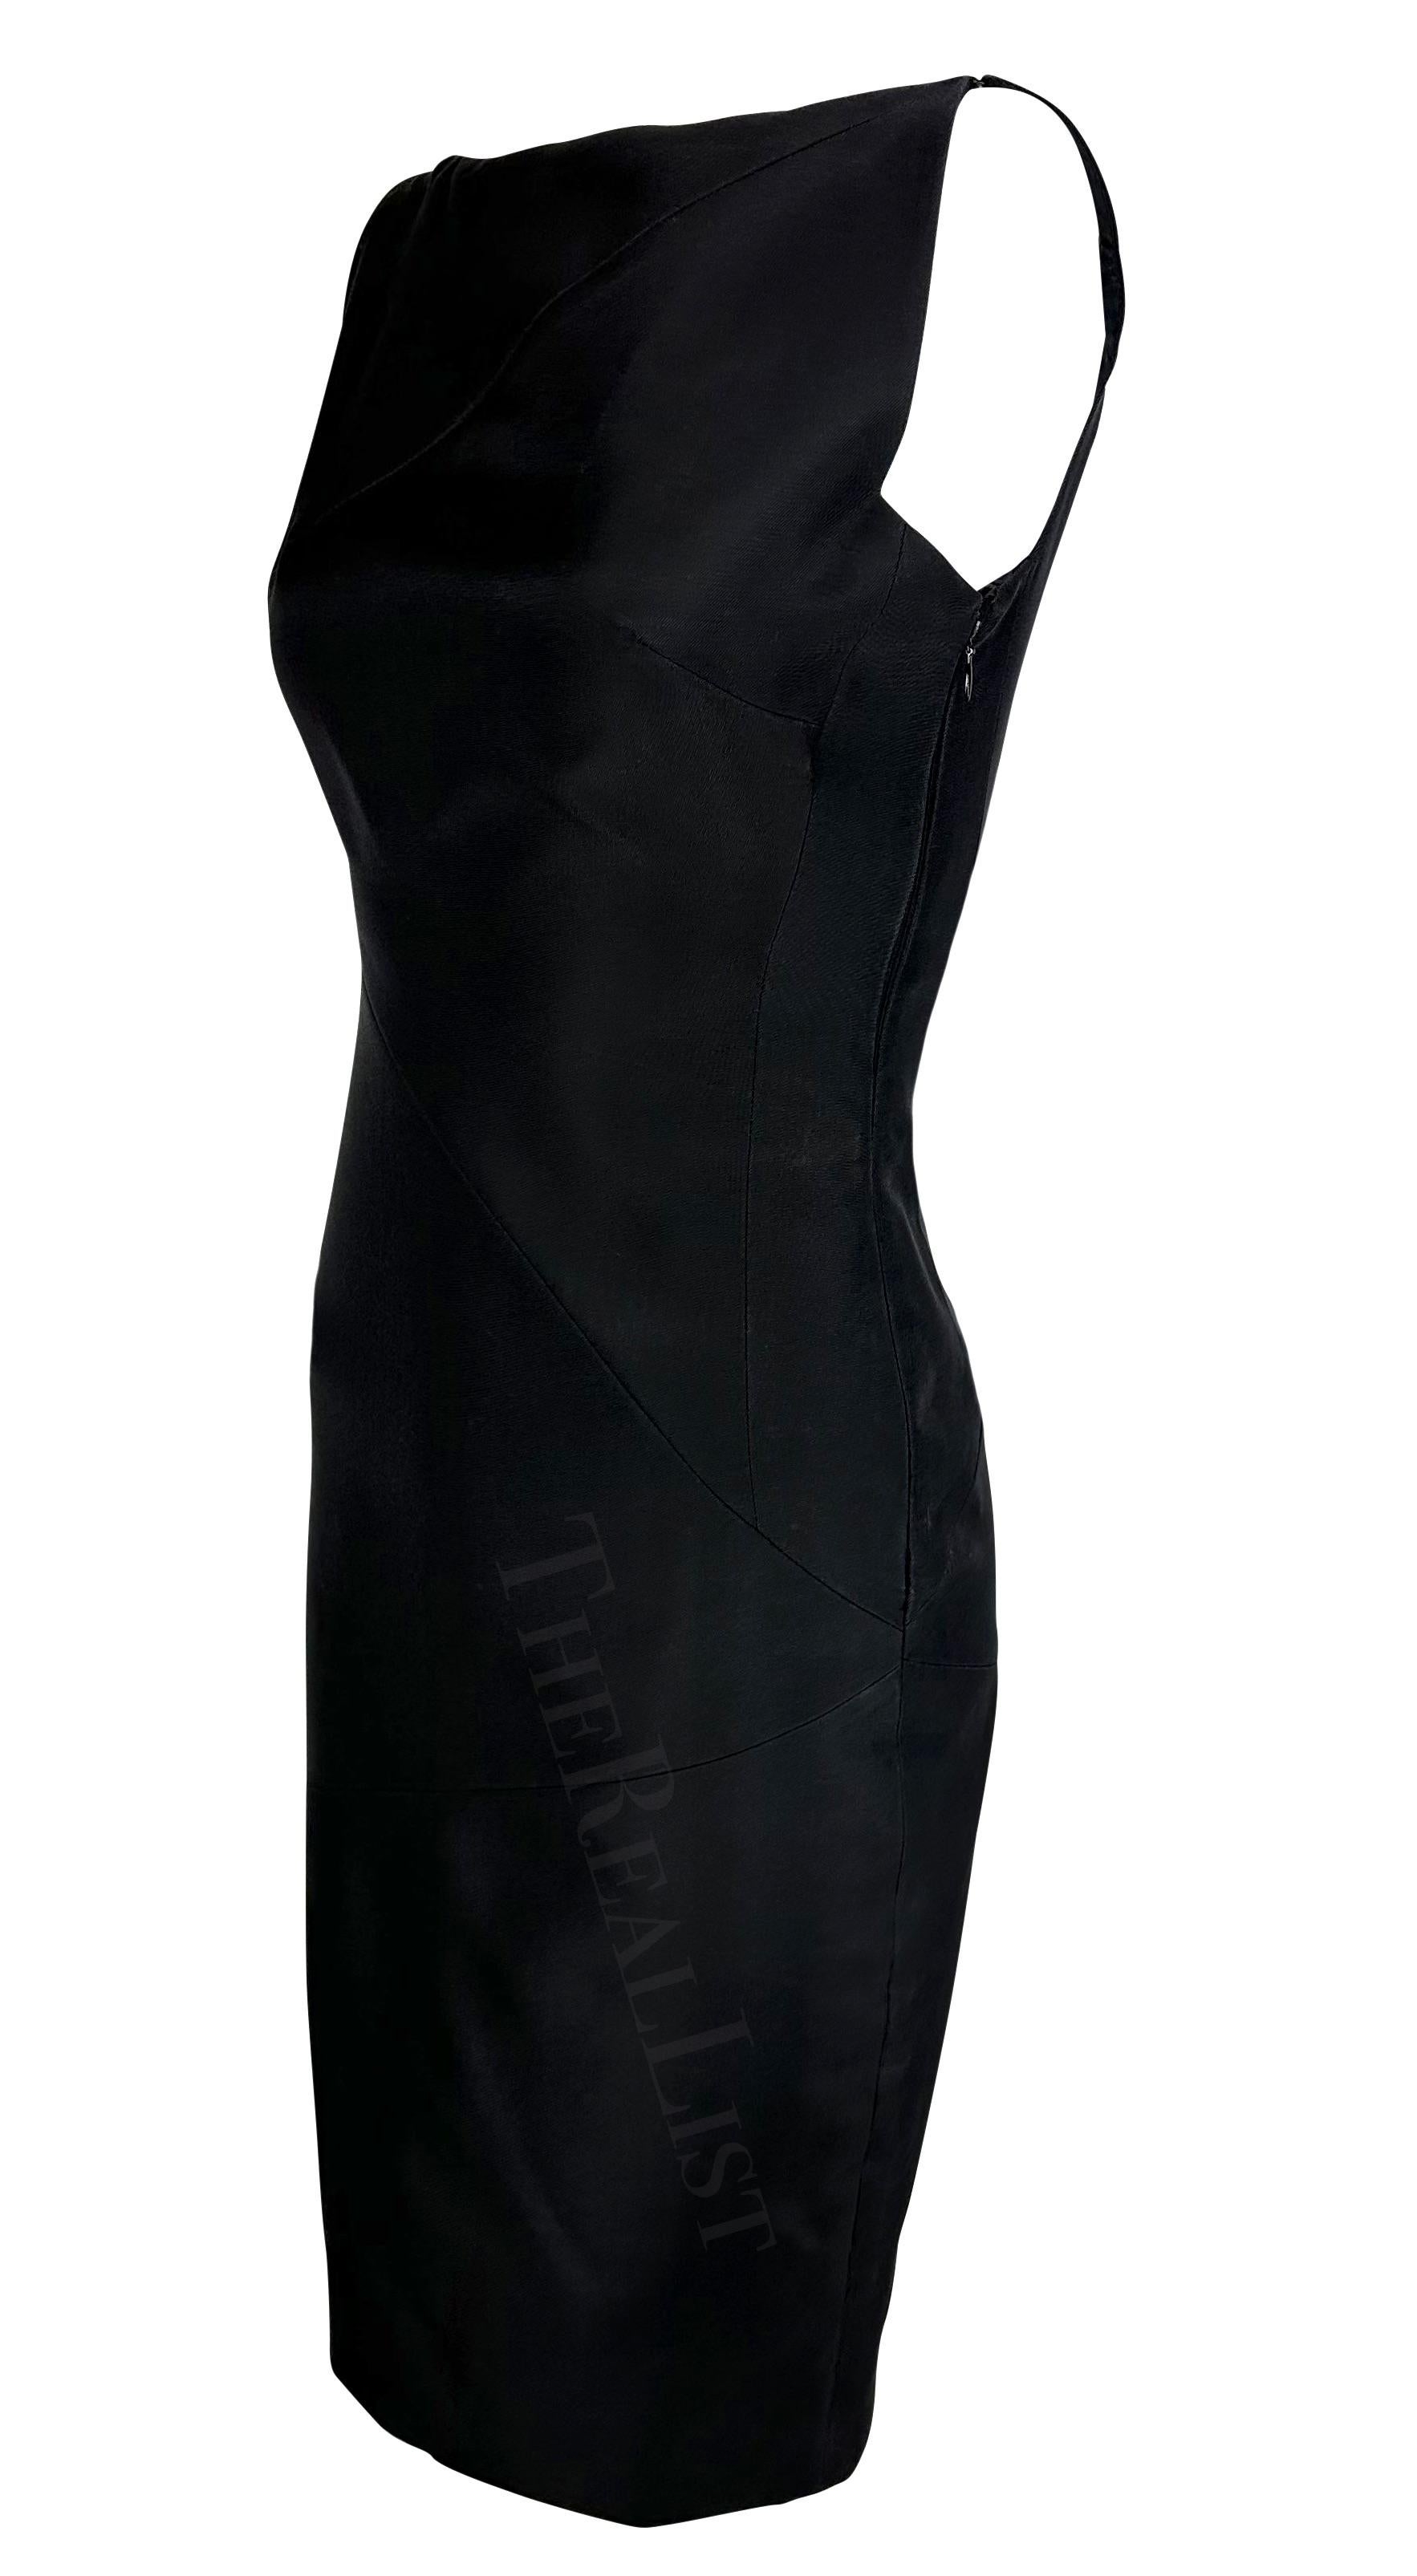 S/S 1998 Gucci by Tom Ford Runway Black Sleeveless Panel Bodycon Bateau Dress In Good Condition For Sale In West Hollywood, CA